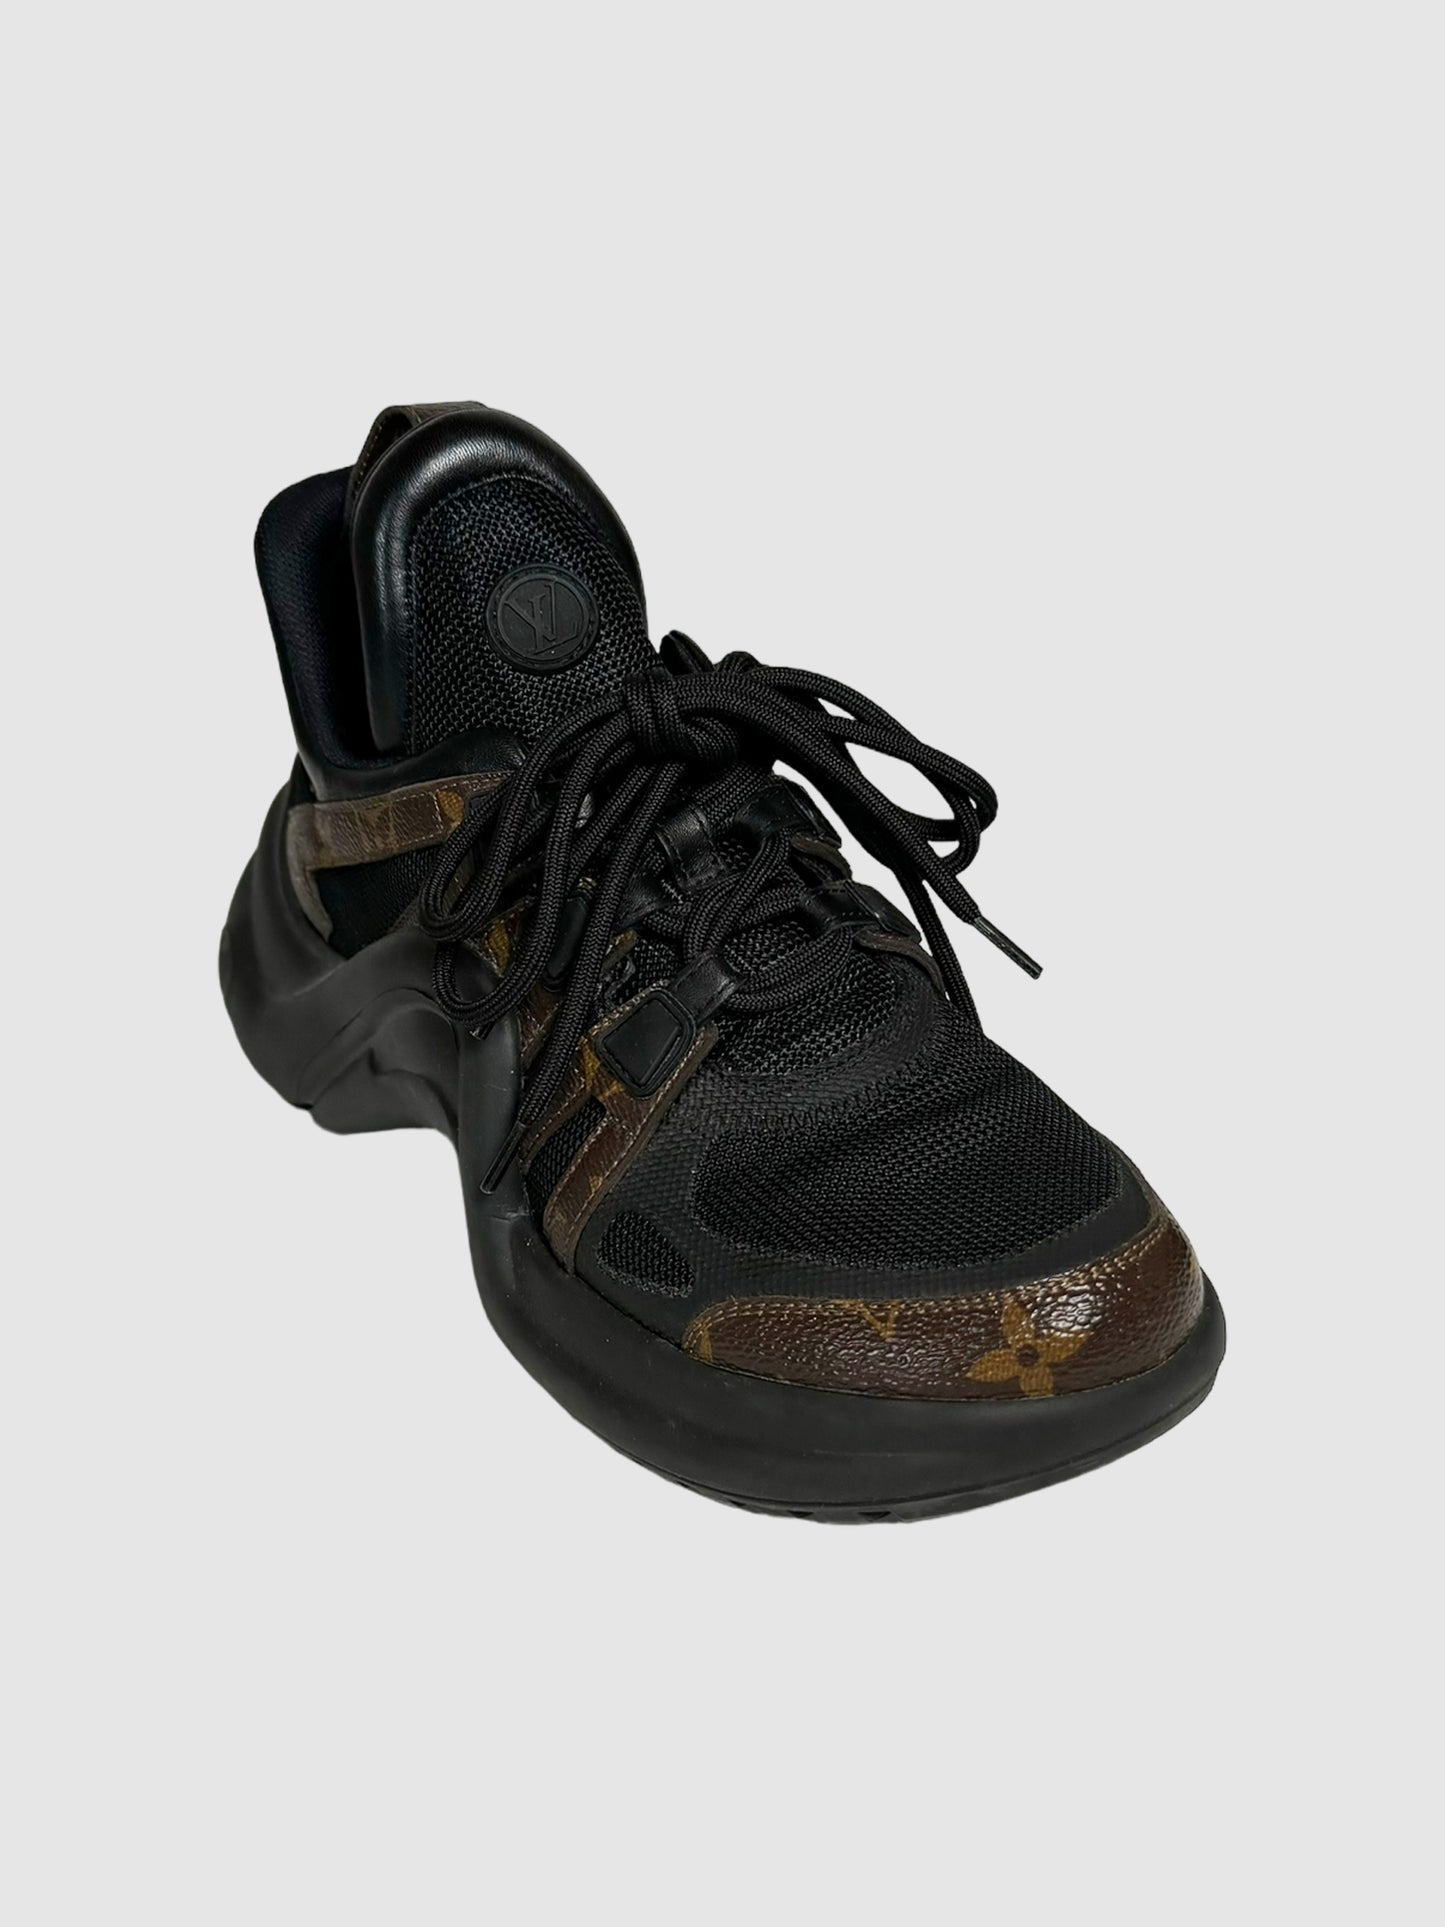 Louis Vuitton "LV Archlight" Lace-Up Sneakers in Black and Brown Leather Monogram Trim Secondhand Luxury Thrift Designer